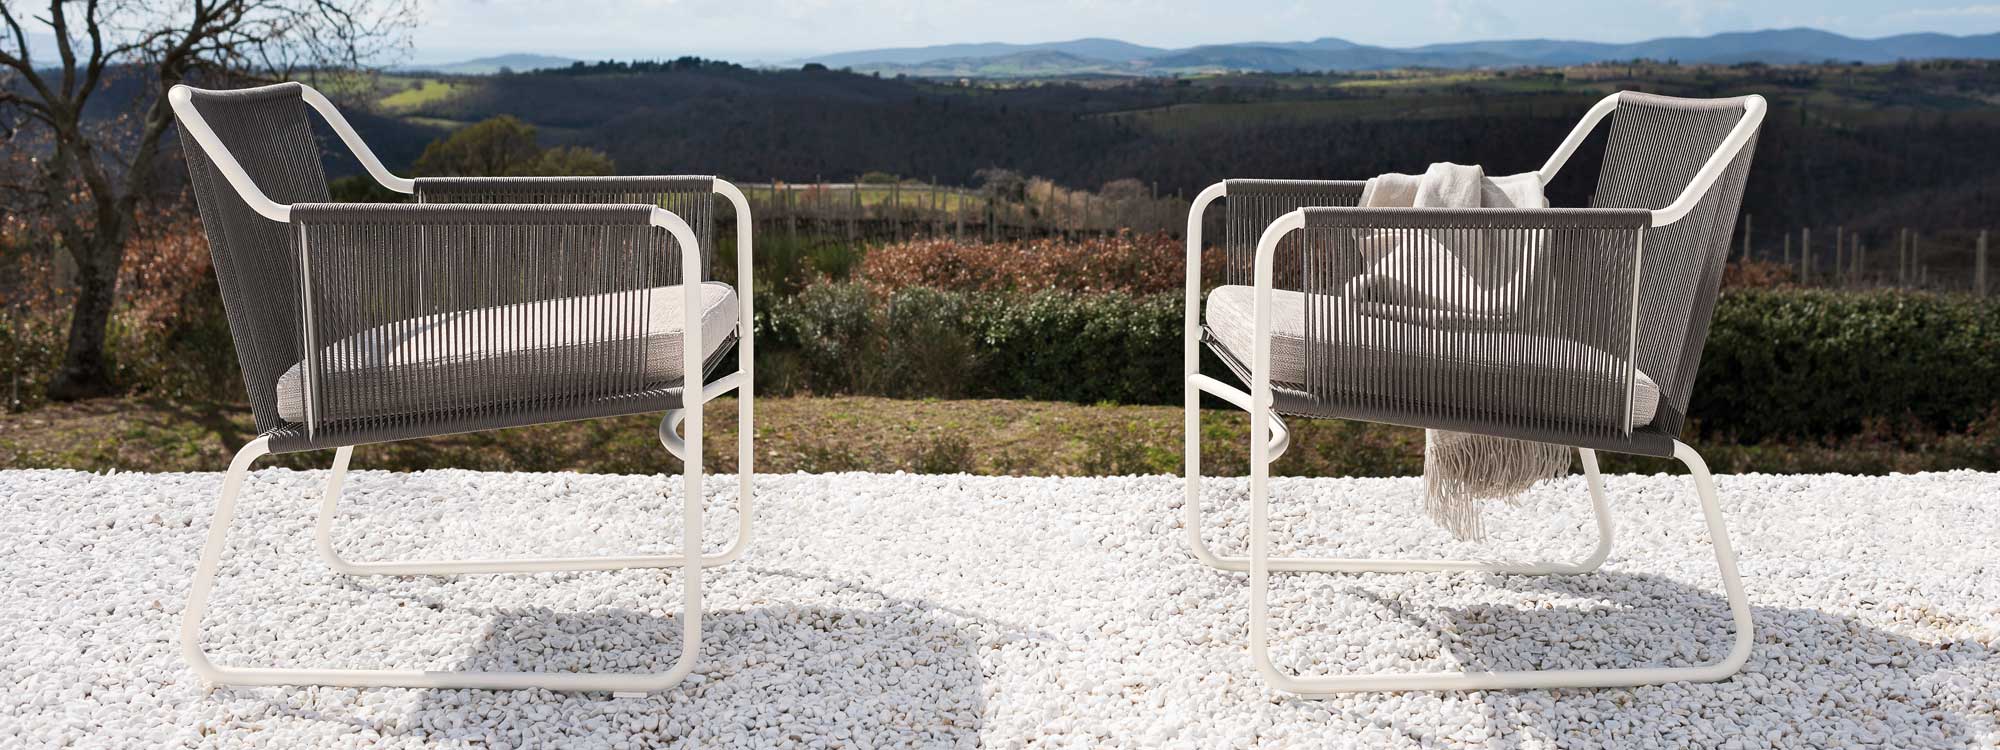 Image of pair of white Harp modern garden lounge chairs with stone colored seat, back and arms on white gravel with Tuscan landscape behind